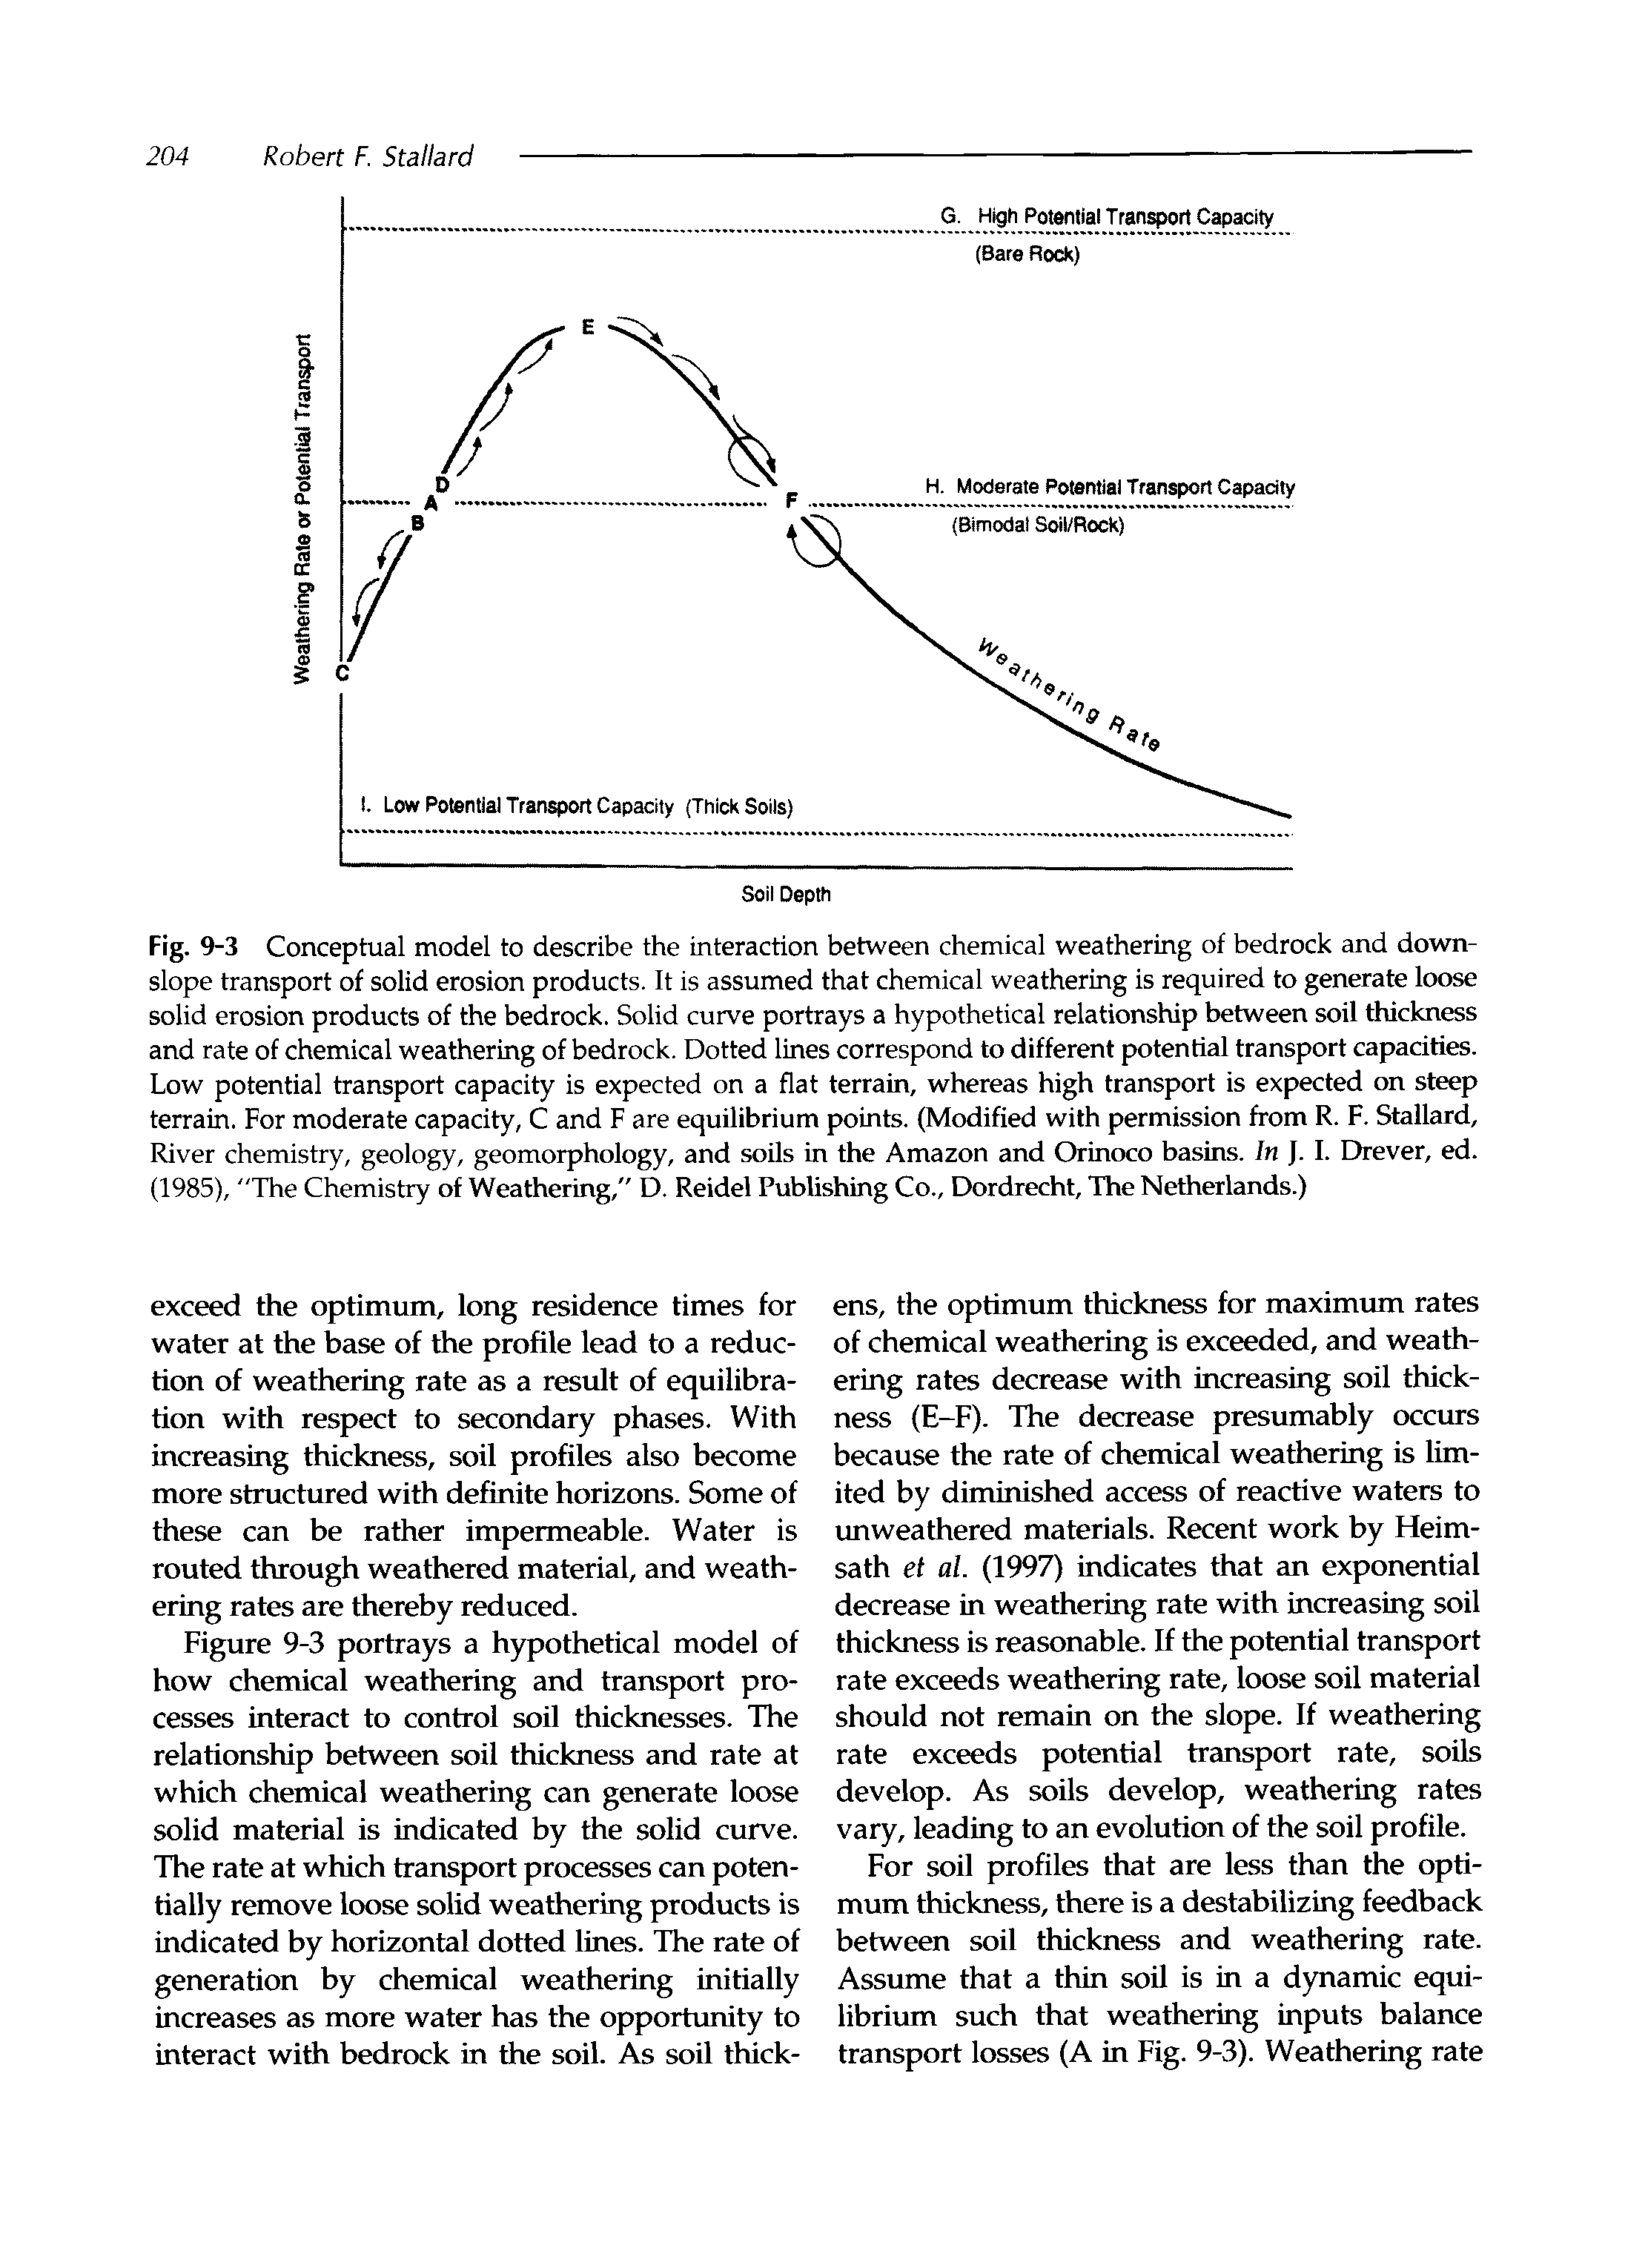 Fig. 9-3 Conceptual model to describe the interaction between chemical weathering of bedrock and down-slope transport of solid erosion products. It is assumed that chemical weathering is required to generate loose solid erosion products of the bedrock. Solid curve portrays a hypothetical relationship between soil thickness and rate of chemical weathering of bedrock. Dotted lines correspond to different potential transport capacities. Low potential transport capacity is expected on a flat terrain, whereas high transport is expected on steep terrain. For moderate capacity, C and F are equilibrium points. (Modified with permission from R. F. Stallard, River chemistry, geology, geomorphology, and soils in the Amazon and Orinoco basins. In J. I. Drever, ed. (1985), "The Chemistry of Weathering," D. Reidel Publishing Co., Dordrecht, The Netherlands.)...